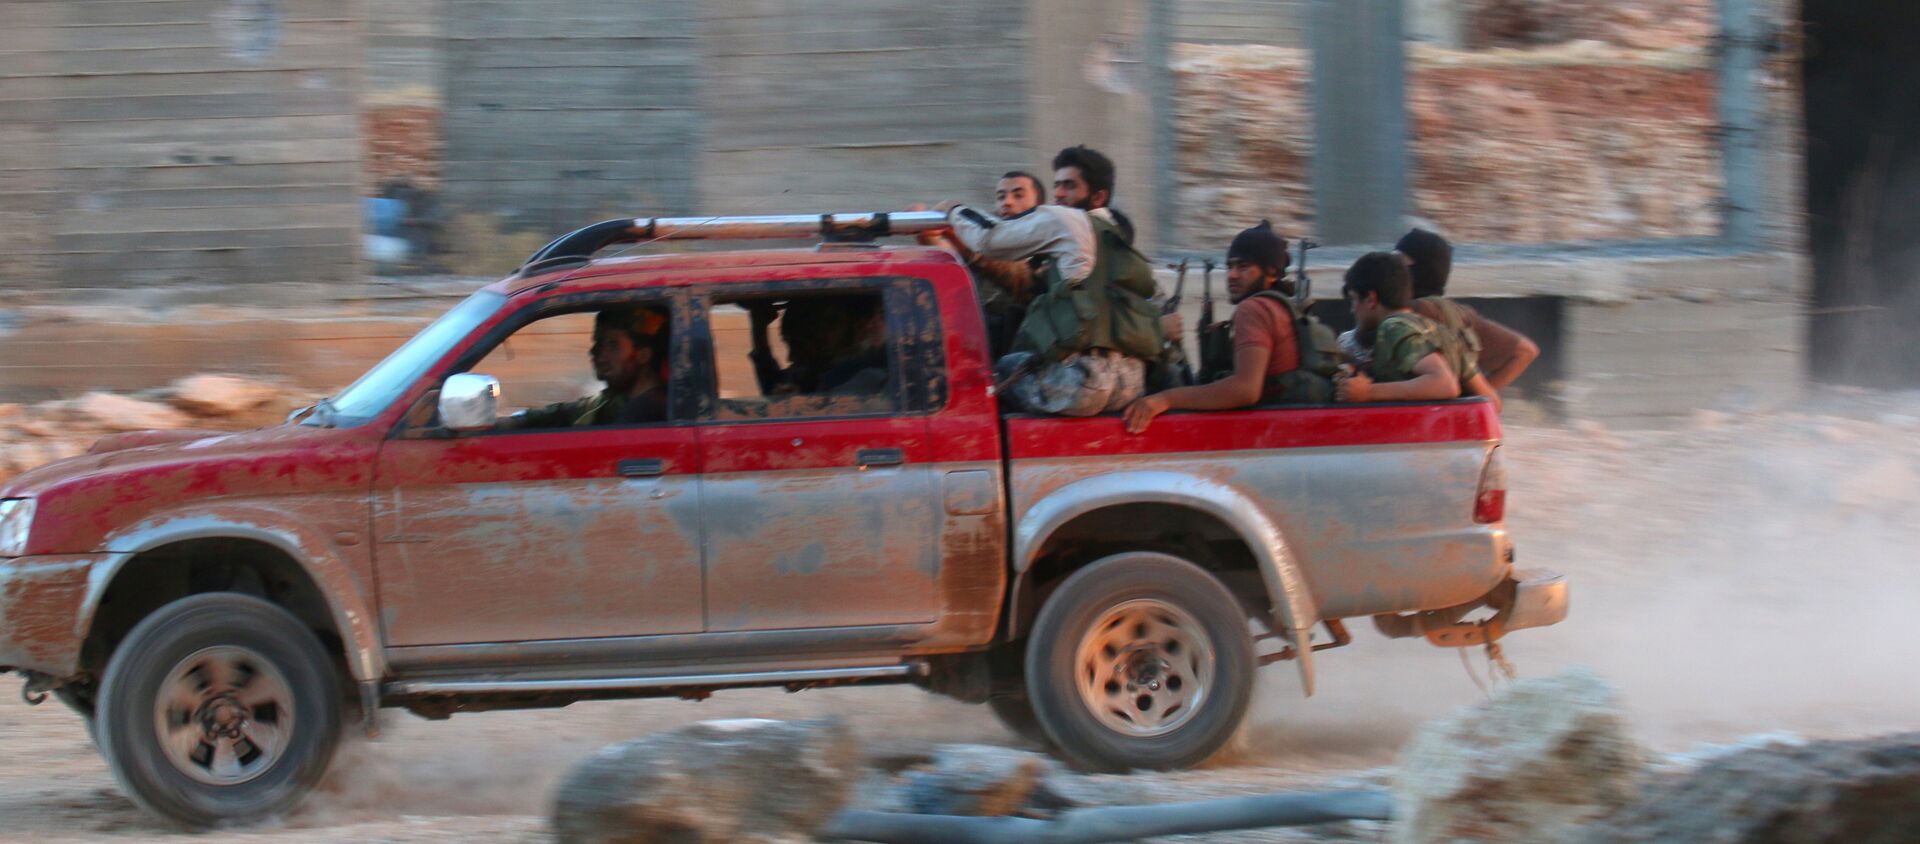 Fighters of the Syrian Islamist rebel group Jabhat Fateh al-Sham, the former al Qaeda-affiliated Nusra Front, ride on a pick-up truck in the 1070 Apartment Project area in southwestern Aleppo, Syria August 5, 2016 - Sputnik International, 1920, 13.12.2016